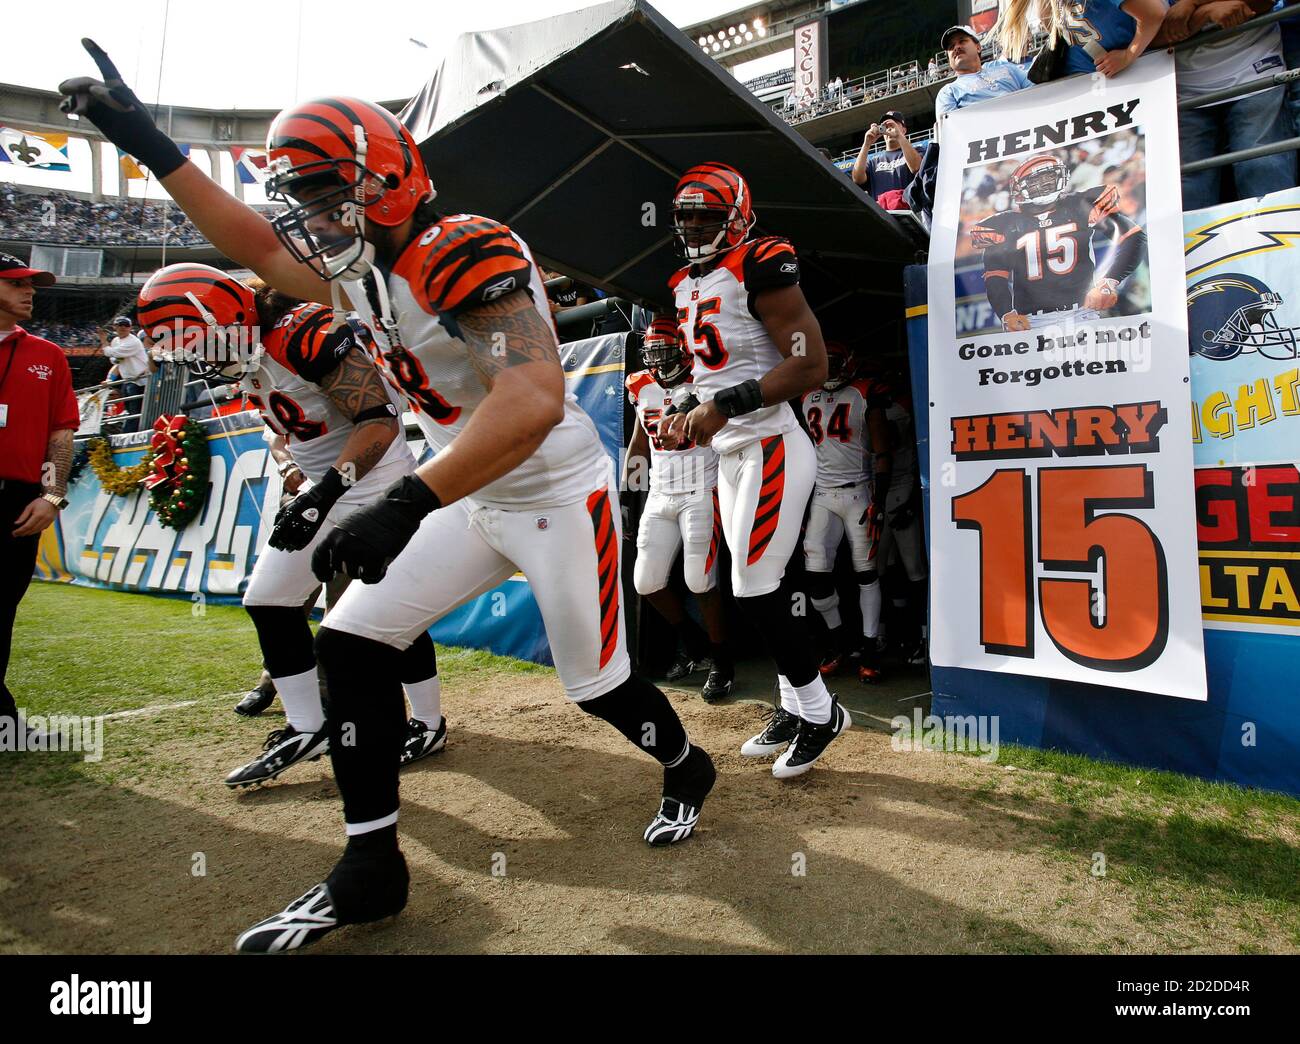 Cincinnati Bengals linebacker Rey Maualuga (C) and Keith Rivers (R) run past a banner commemorating teammate Chris Henry as they take to the field to play their first game following Henry's death, in San Diego December 20, 2009. The Bengals play the San Diego Chargers in NFL football action in San Diego, California   REUTERS/Mike Blake    (UNITED STATES - Tags: SPORT FOOTBALL) Stock Photo